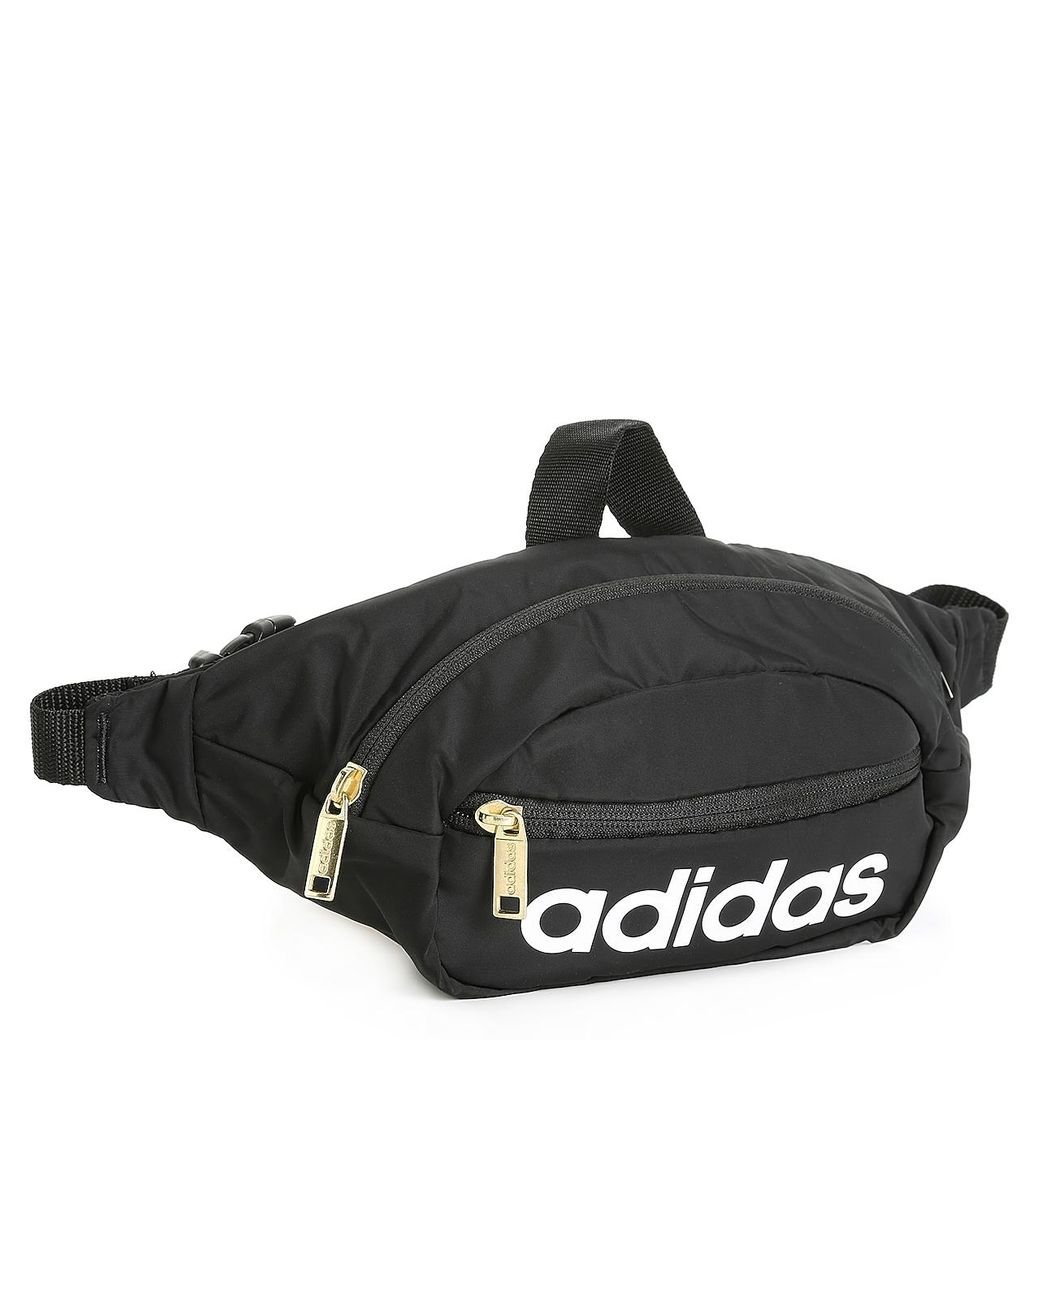 adidas Synthetic Core Waist Pack in Black/ White/ Gold (Black) - Save 24% |  Lyst